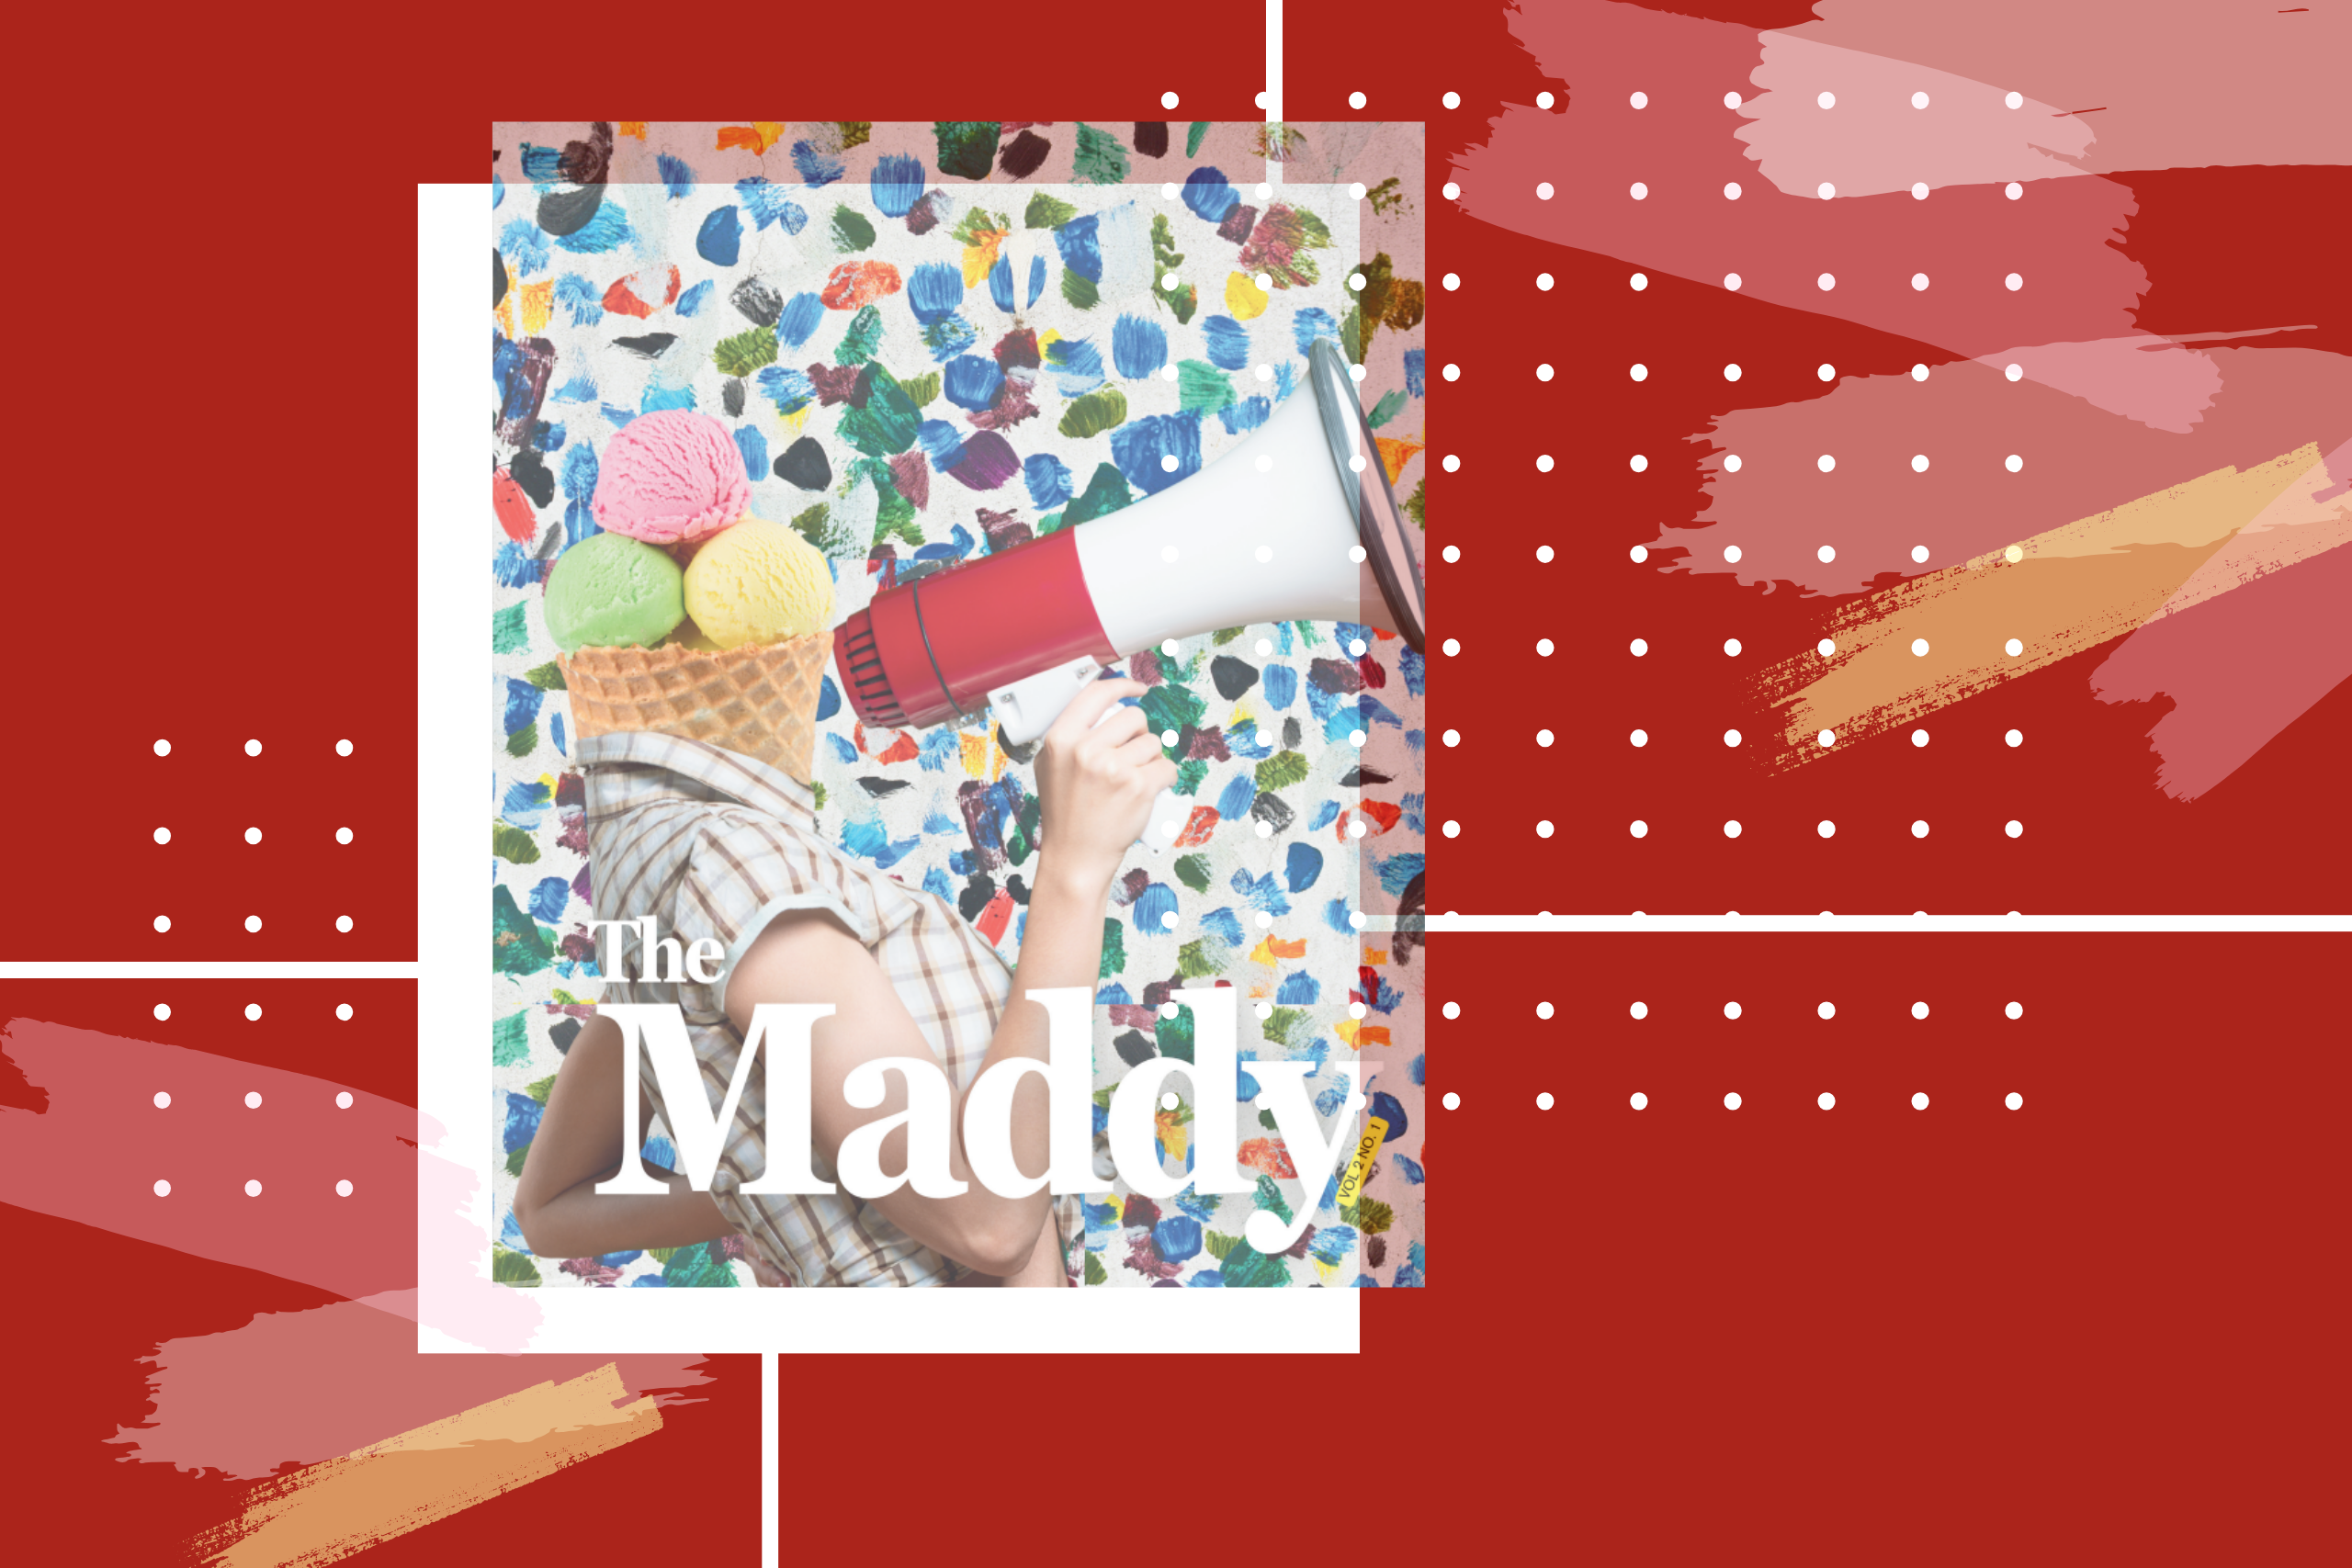 New issue of The Maddy magazine (vol. 2, no. 1) now available online